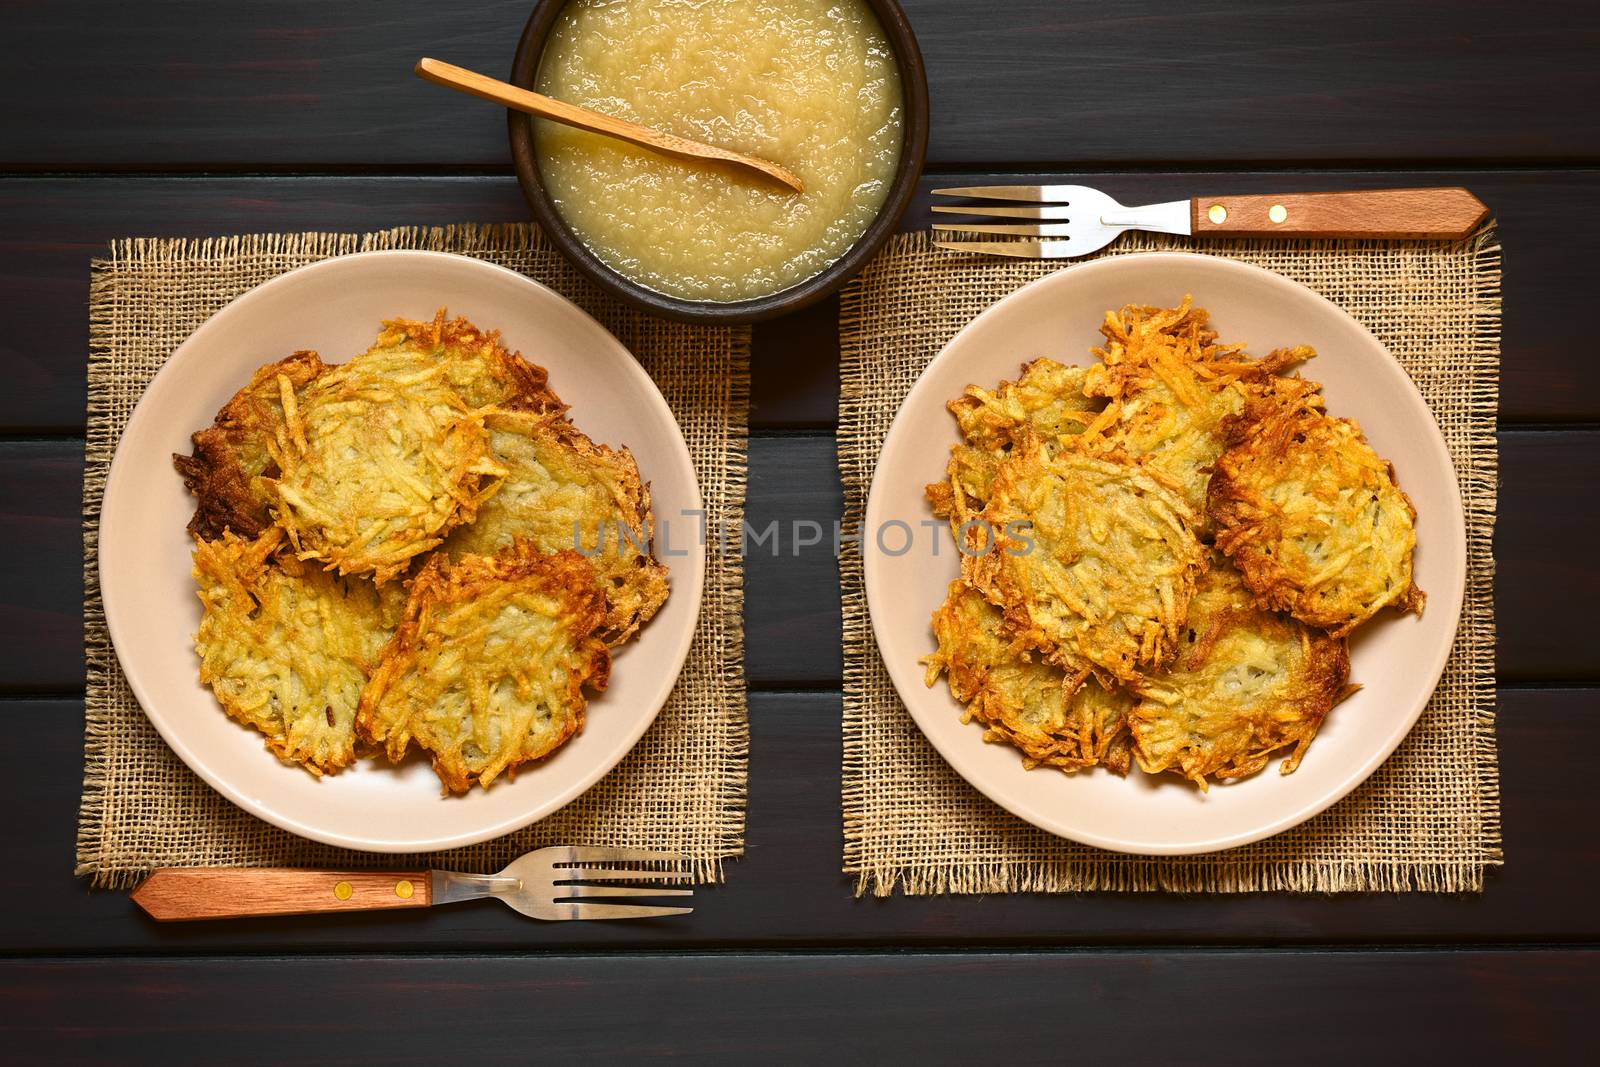 Homemade potato pancakes or fritters on plates with apple sauce, a traditional dish in Germany, photographed overhead on dark wood with natural light